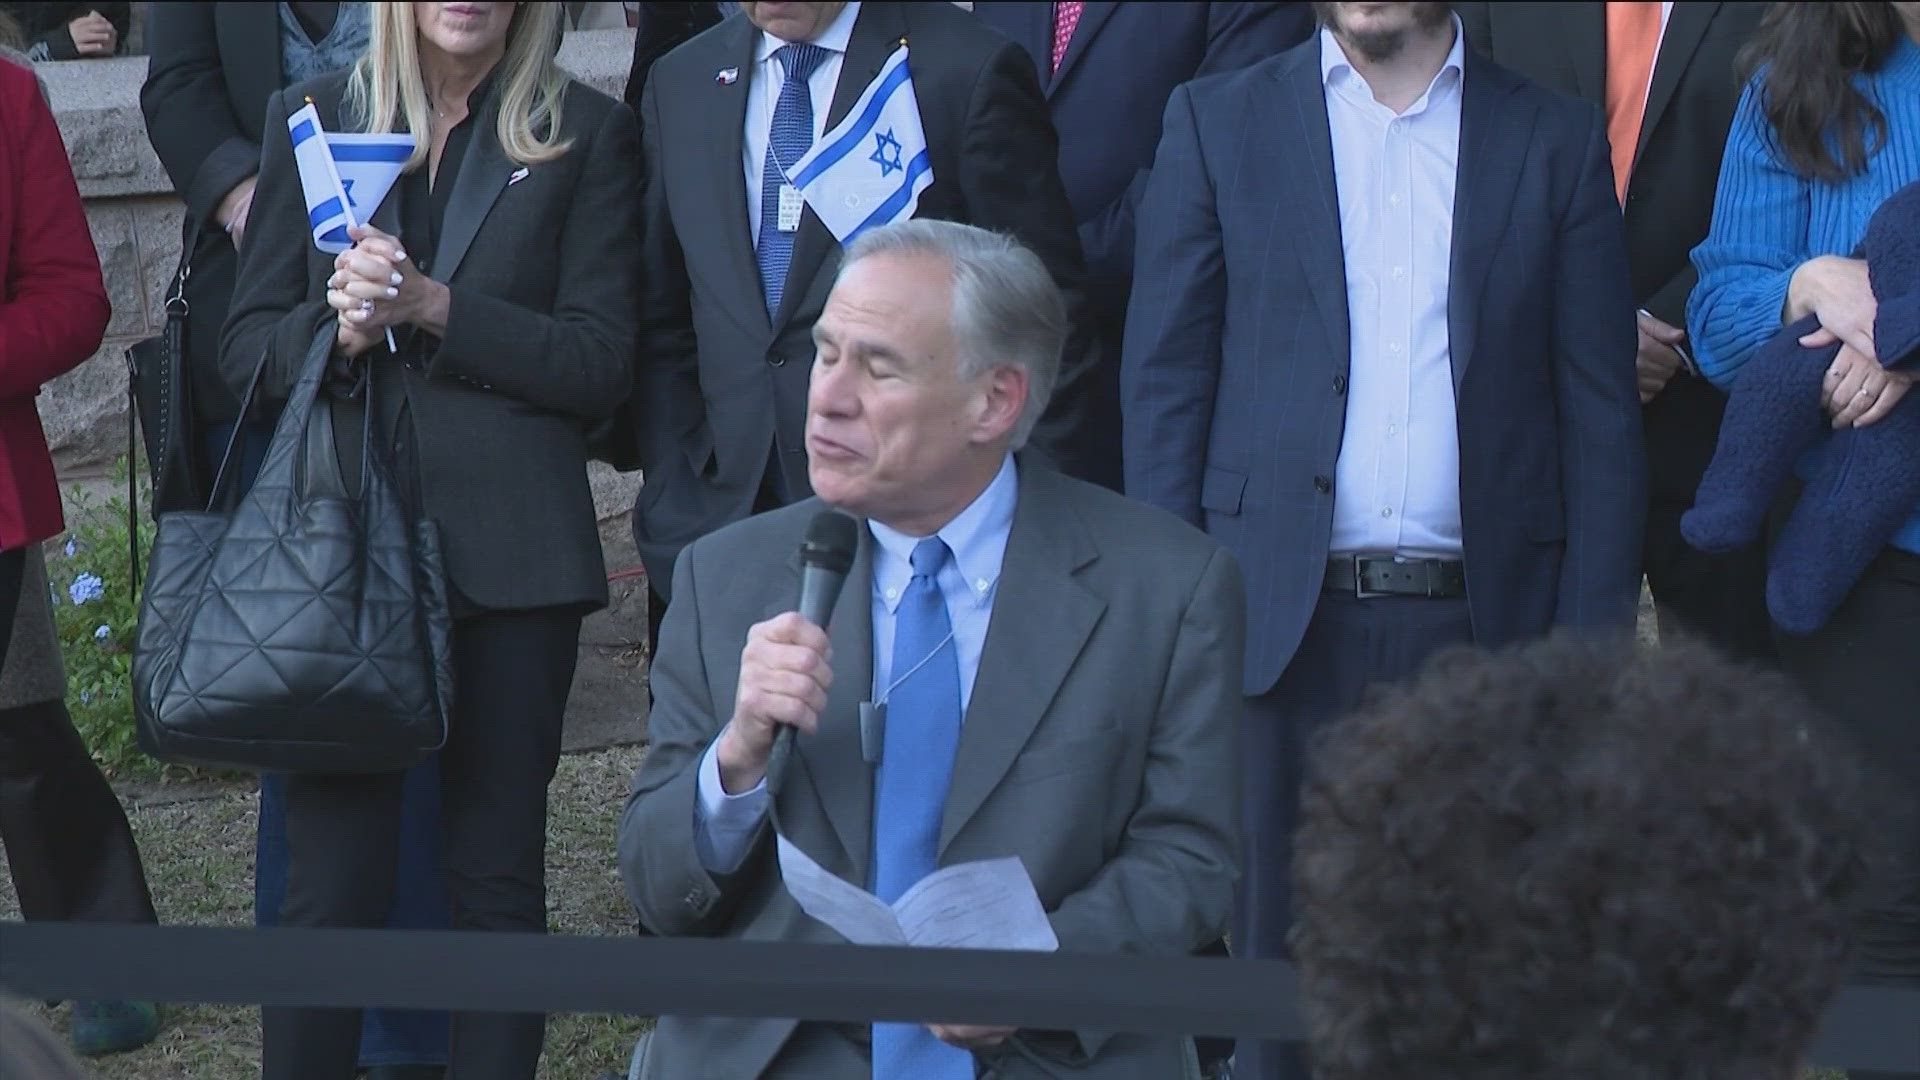 Gov. Greg Abbott celebrated Hanukkah with leaders of the Jewish community at the state Capitol.